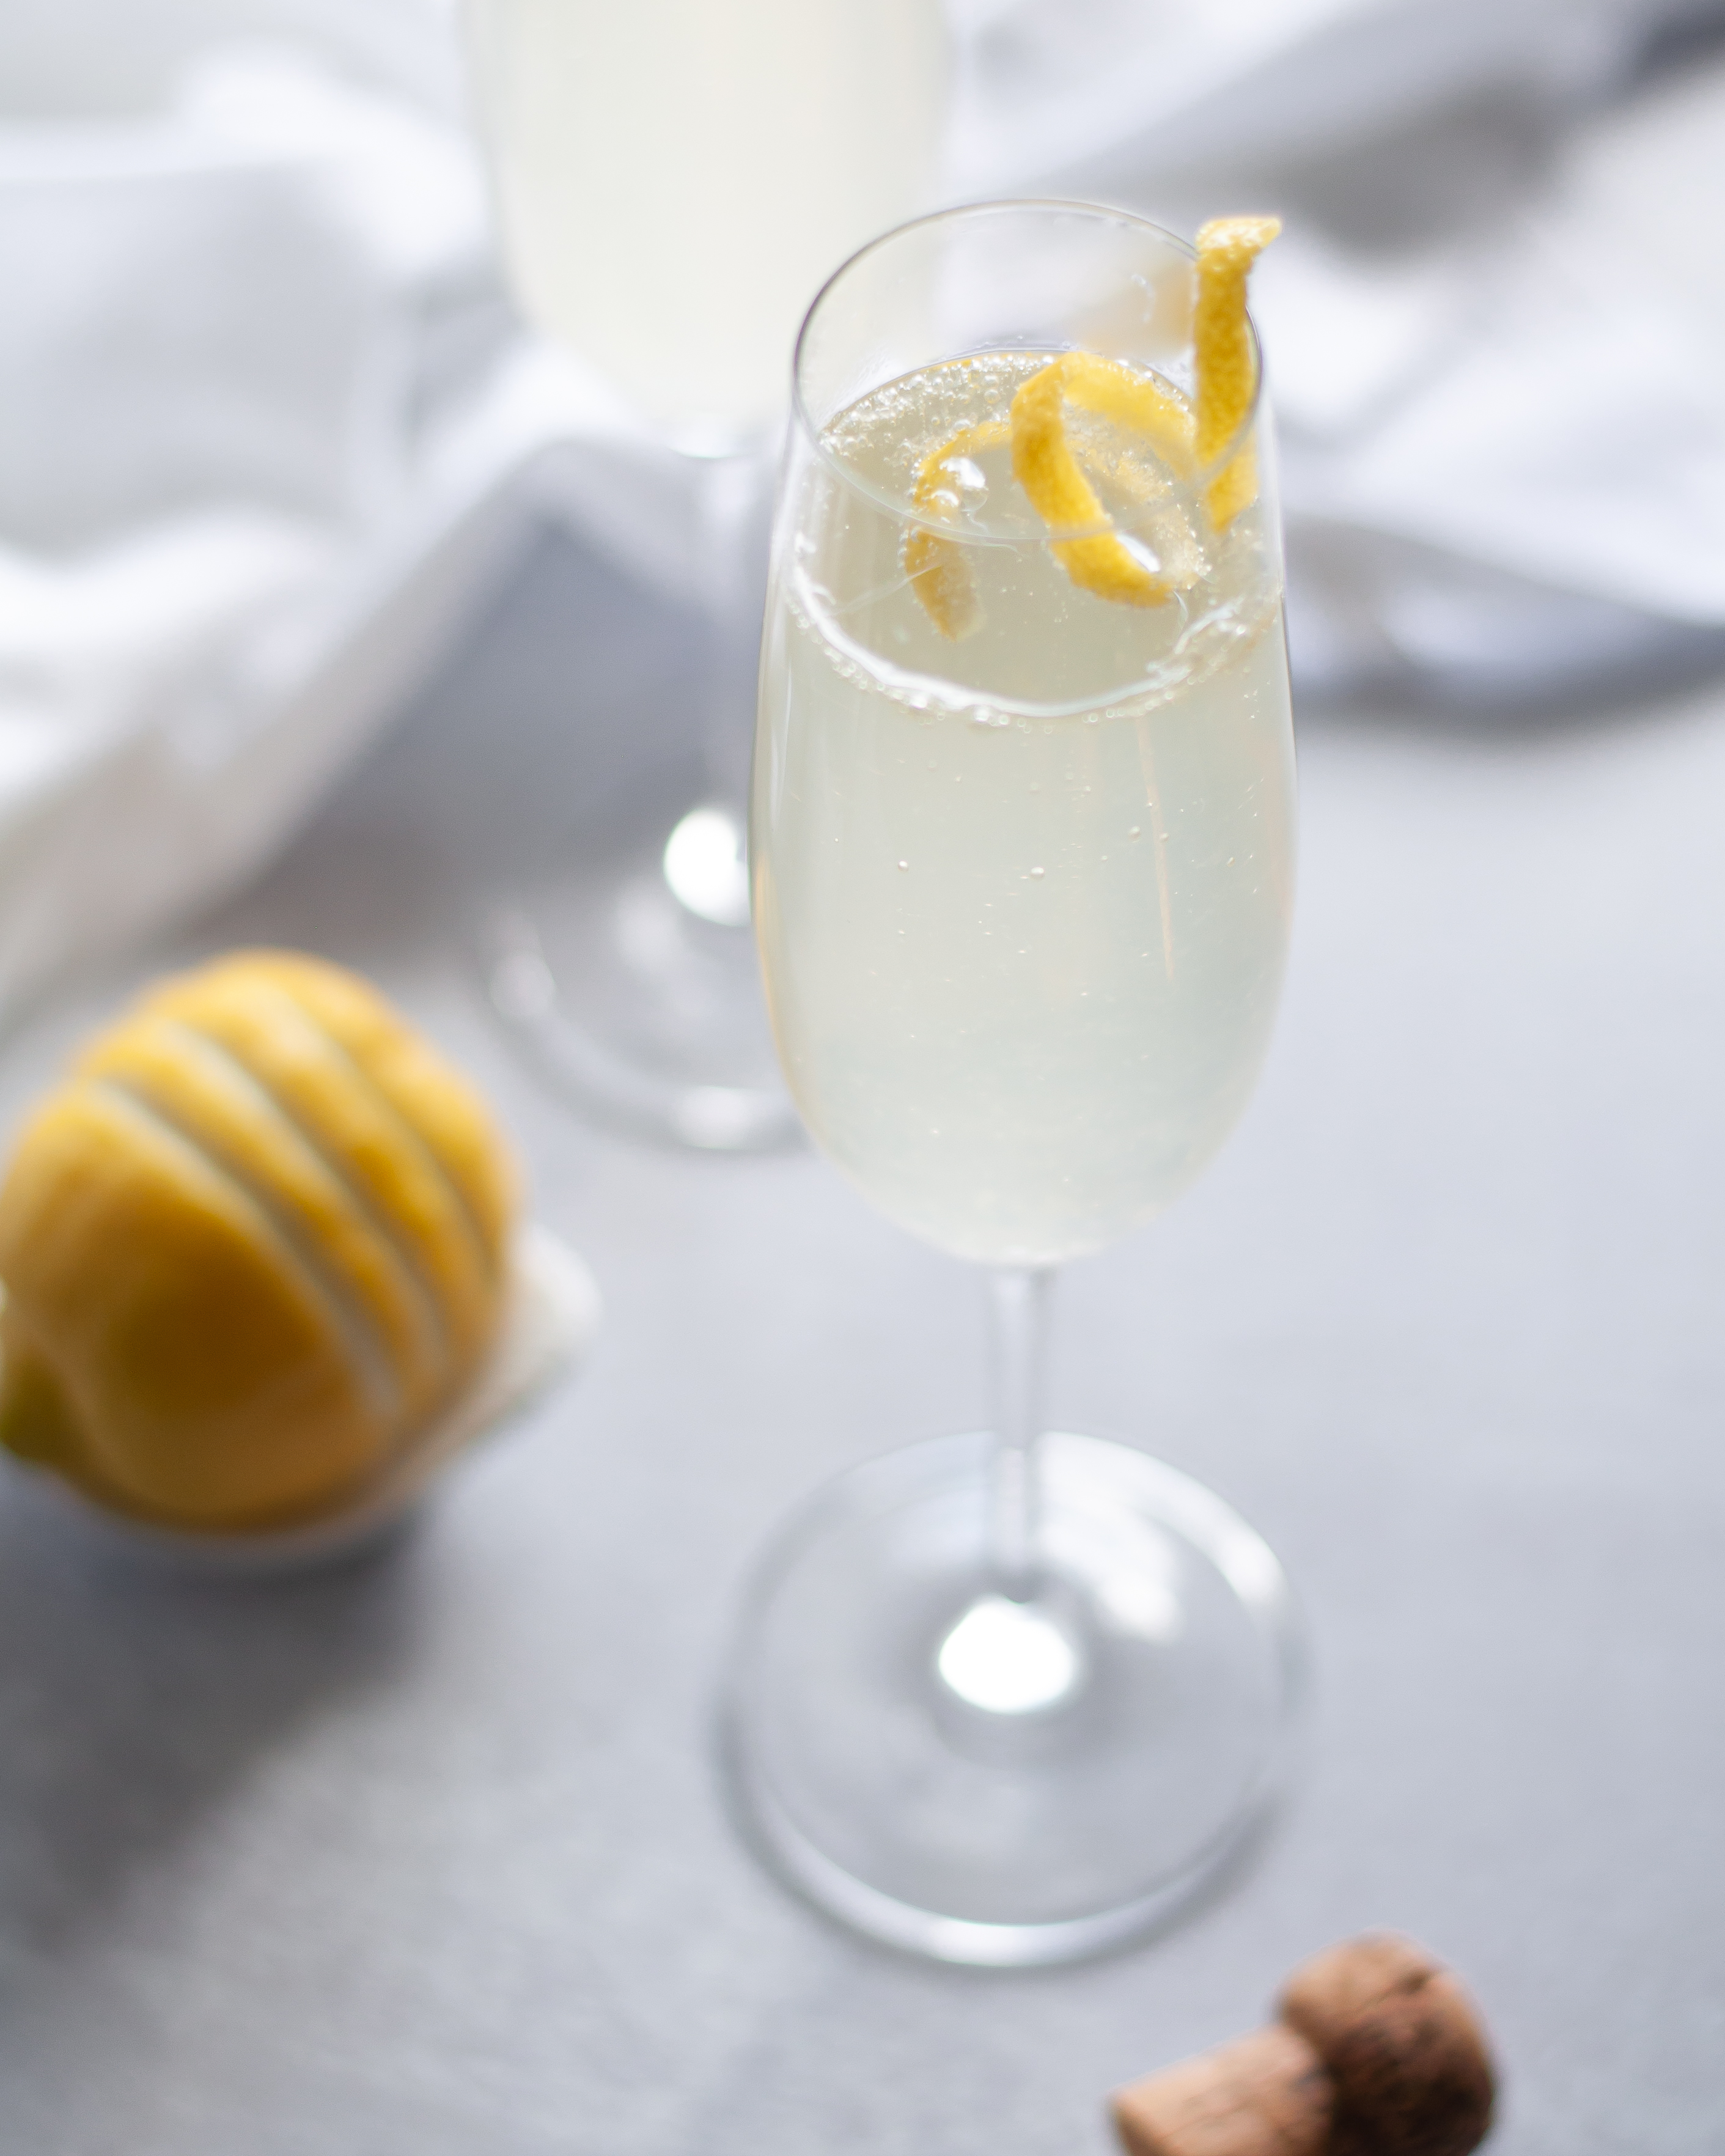 Champagne flute filled with this French 75 recipe and garnished with a lemon twist. Around the glass is a champagne cork, lemon, a 2nd cocktail, and a white napkin.